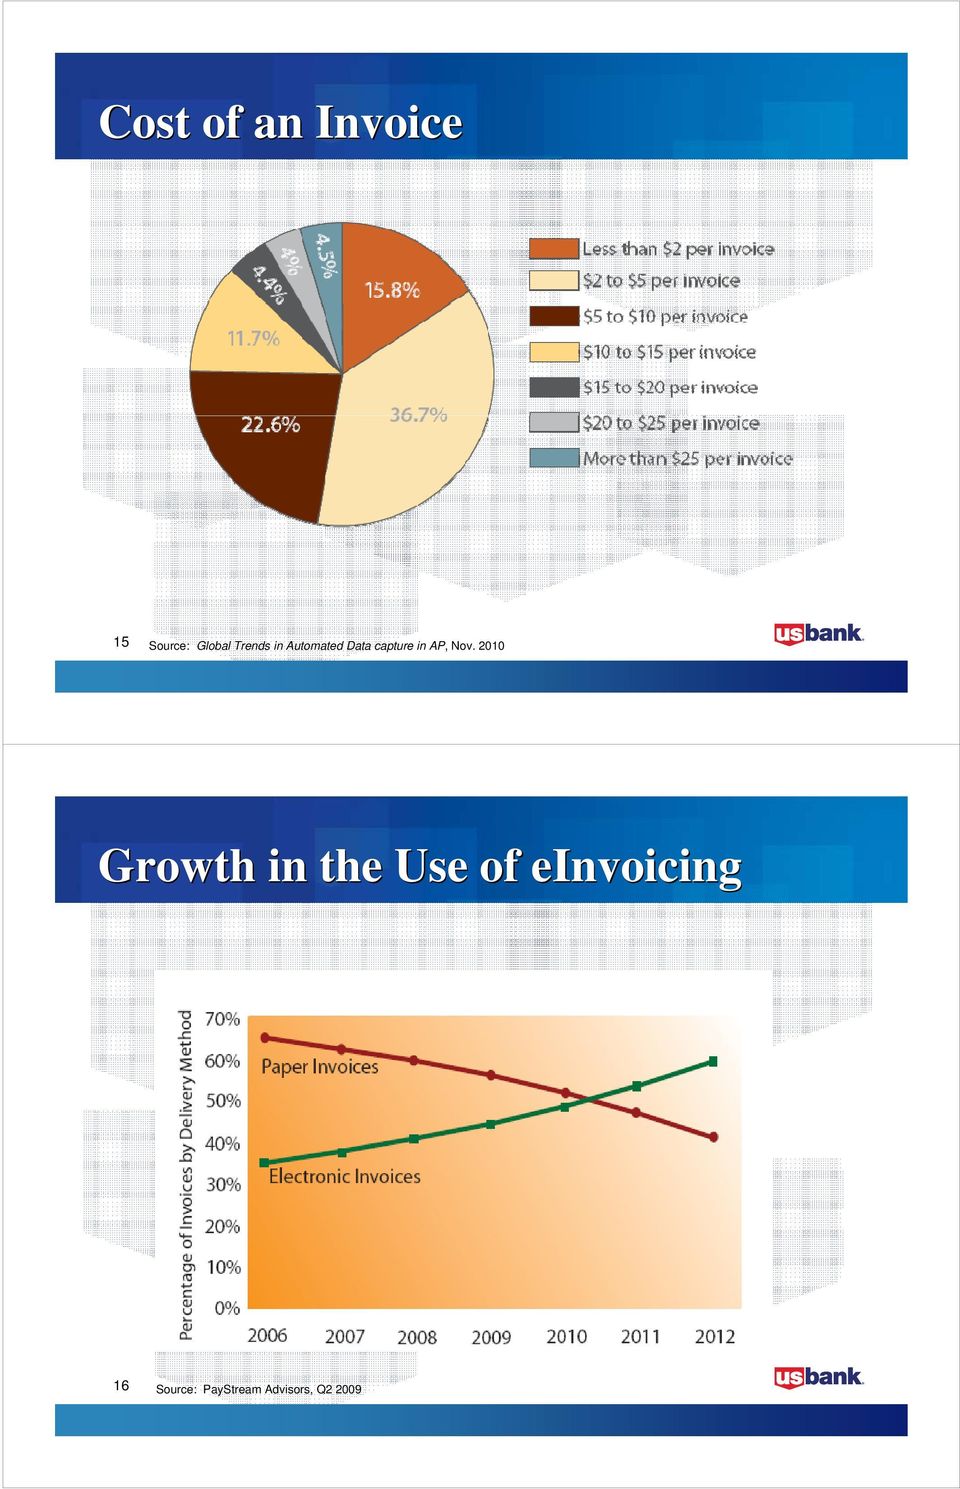 Nov. 2010 Growth in the Use of